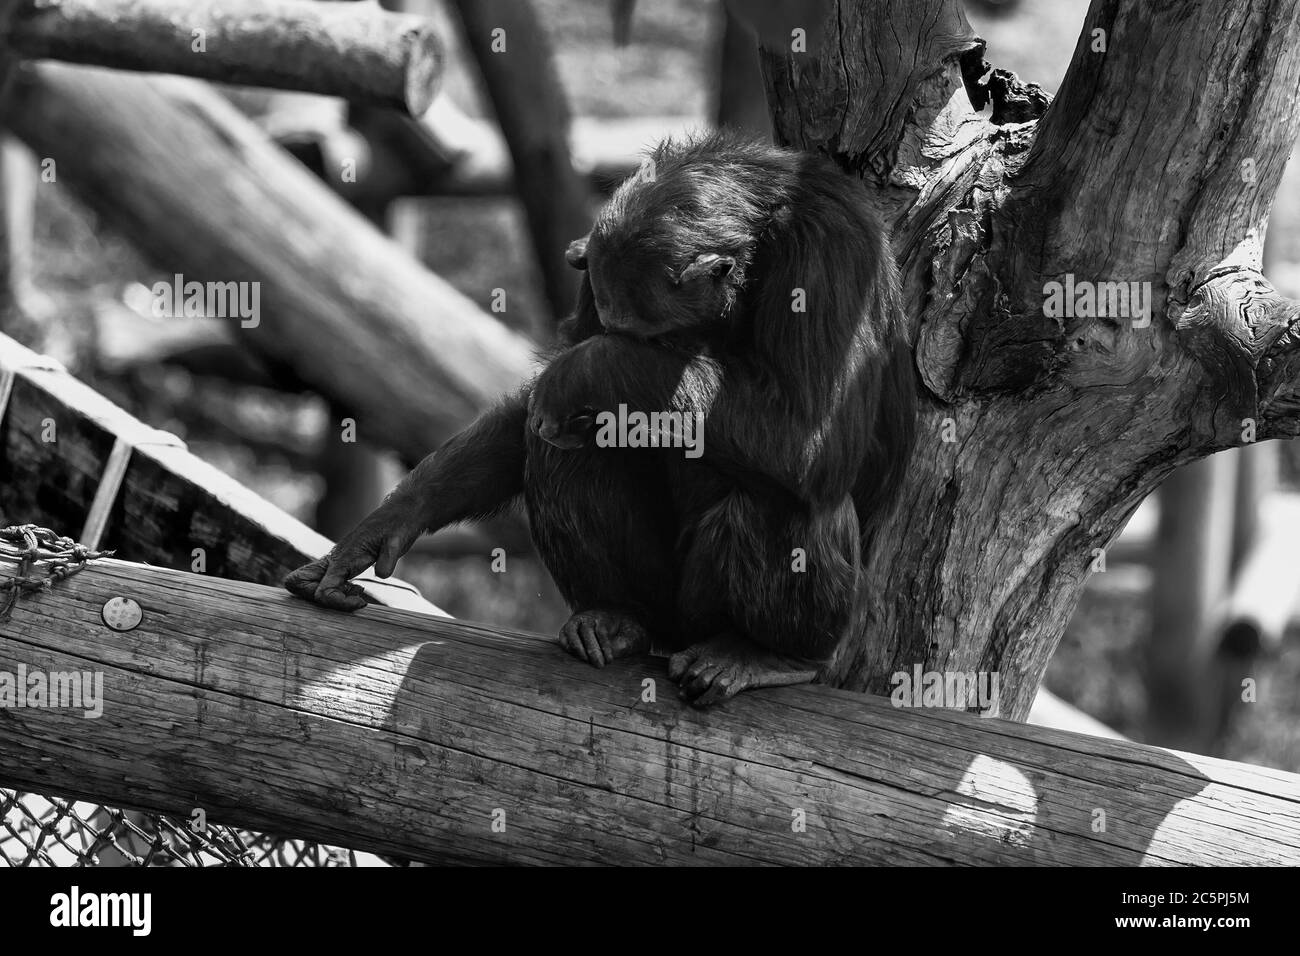 A female chimpanzee sitting with its head bowed down in its compound in the Jerusalem, Israel, zoo. Stock Photo